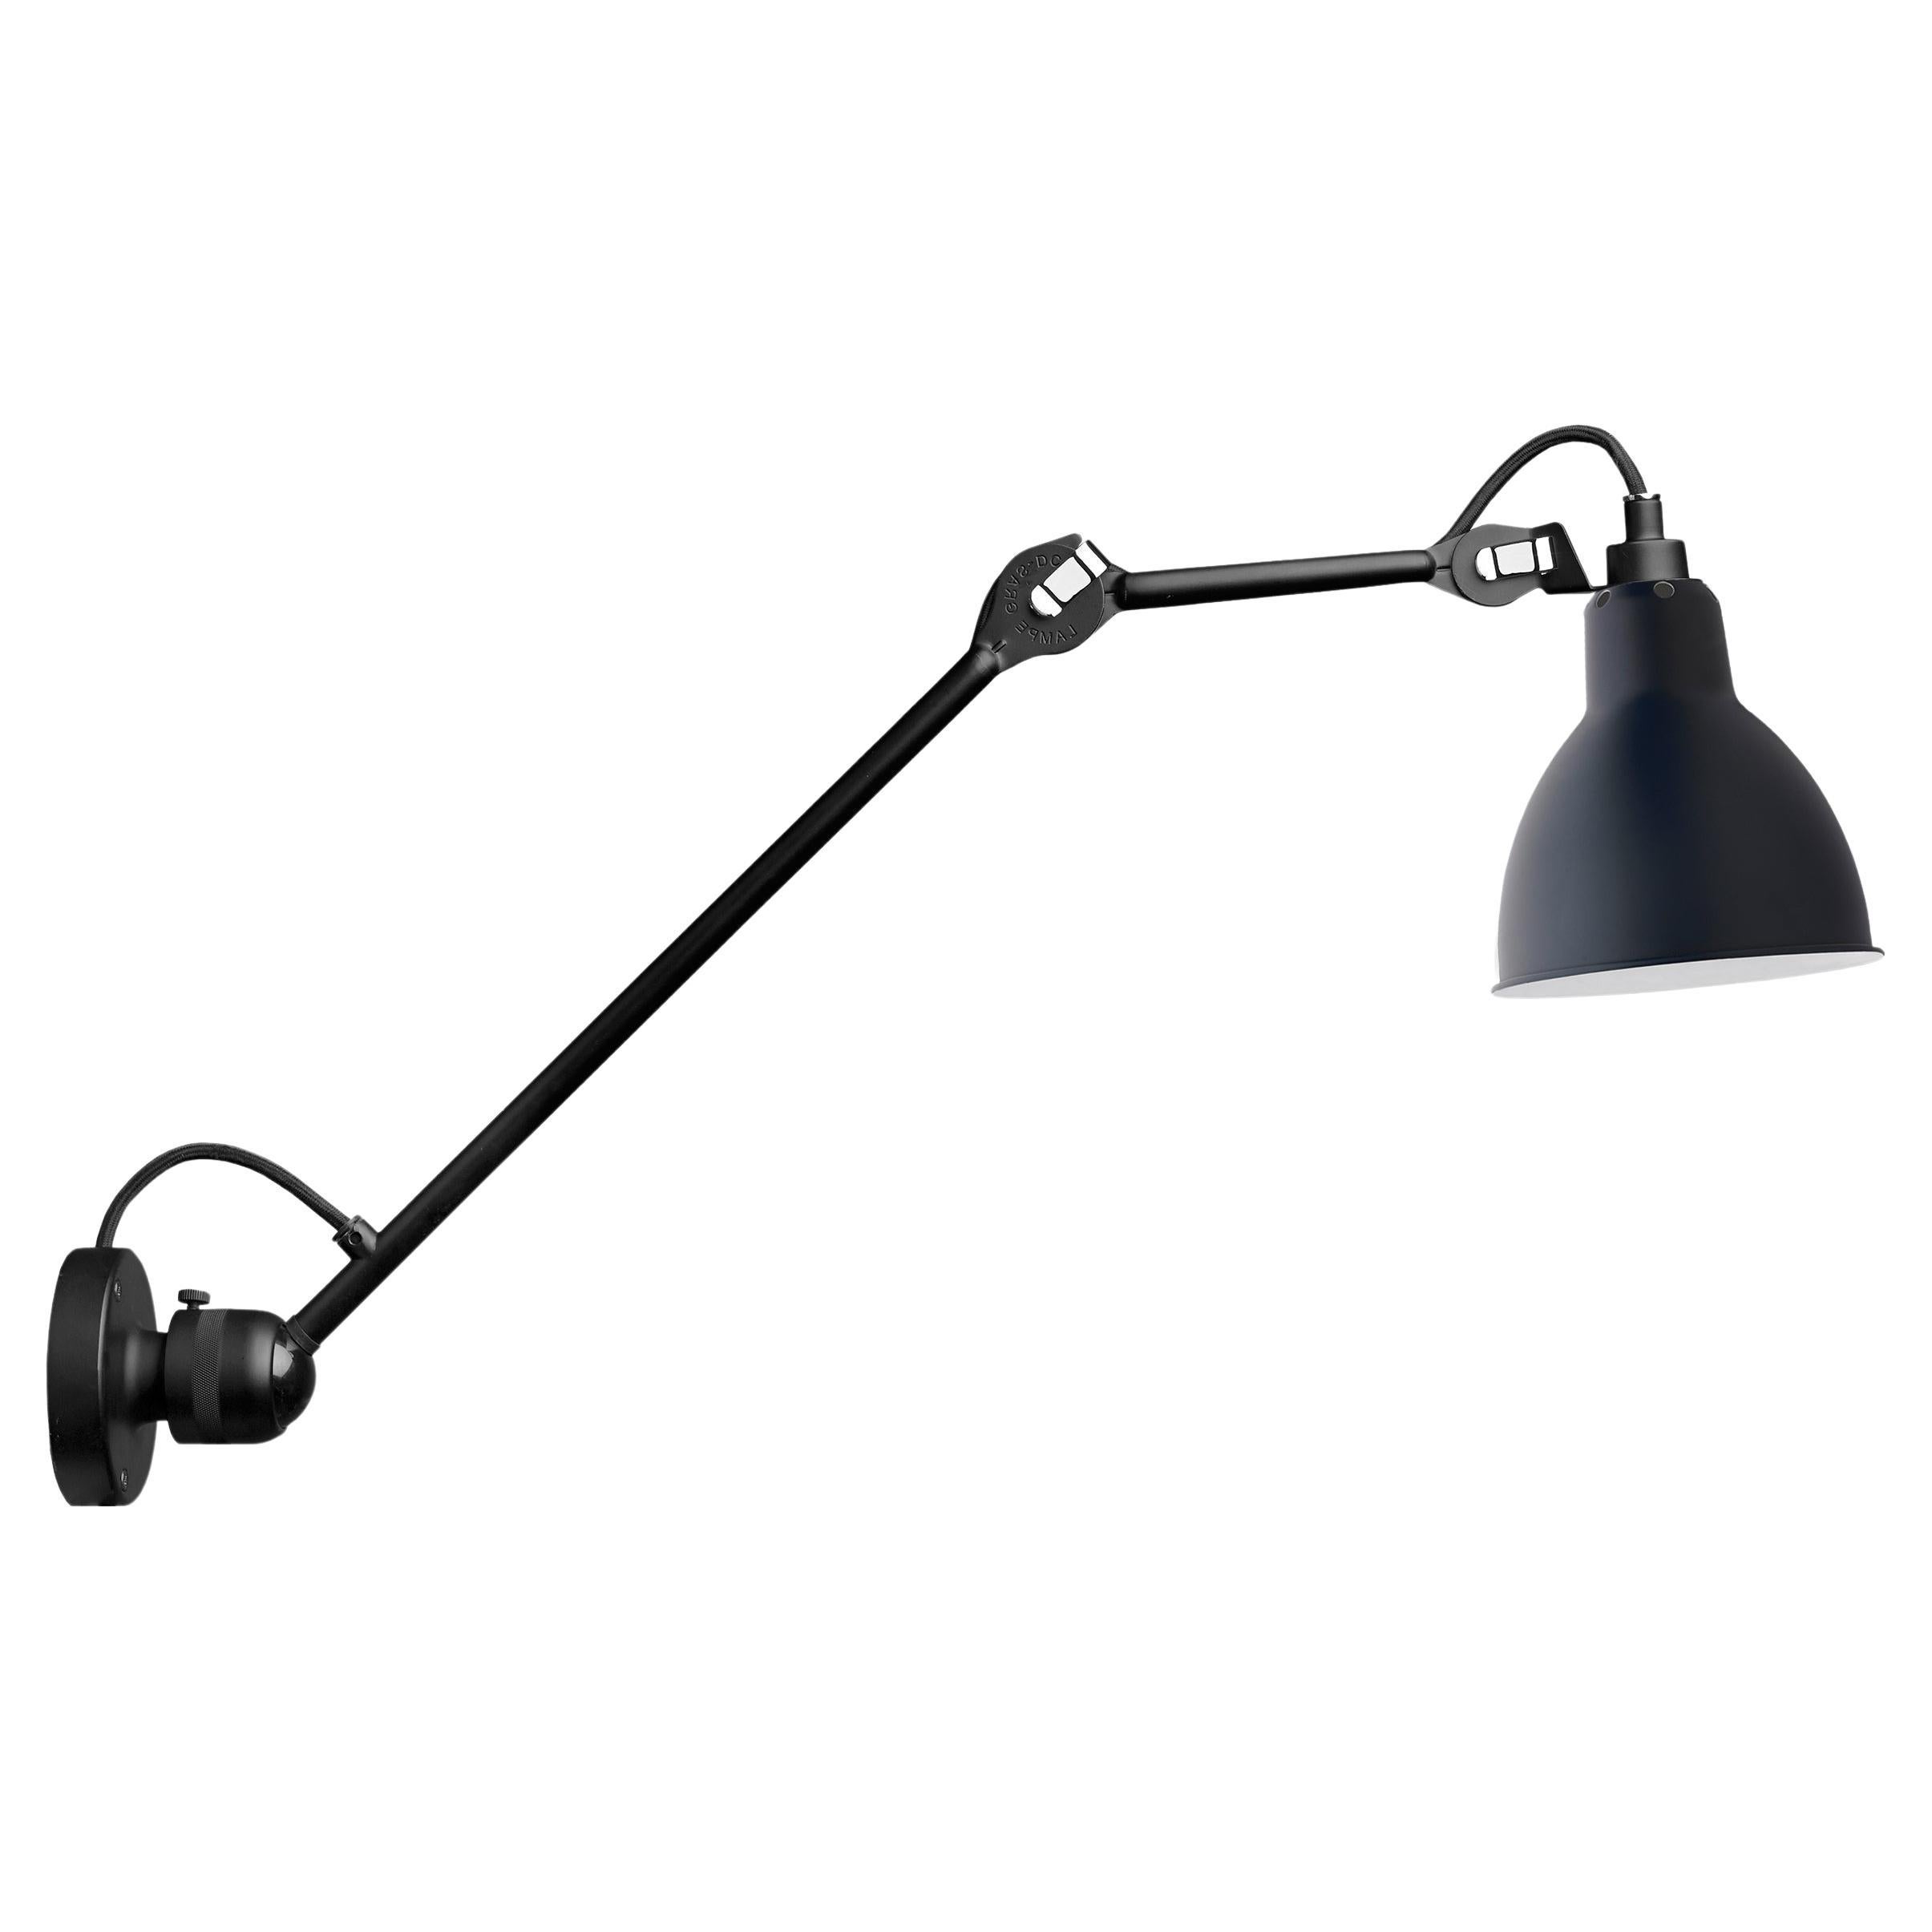 DCW Editions La Lampe Gras N°304 L40 Wall Lamp in Black Arm and Blue Shade For Sale